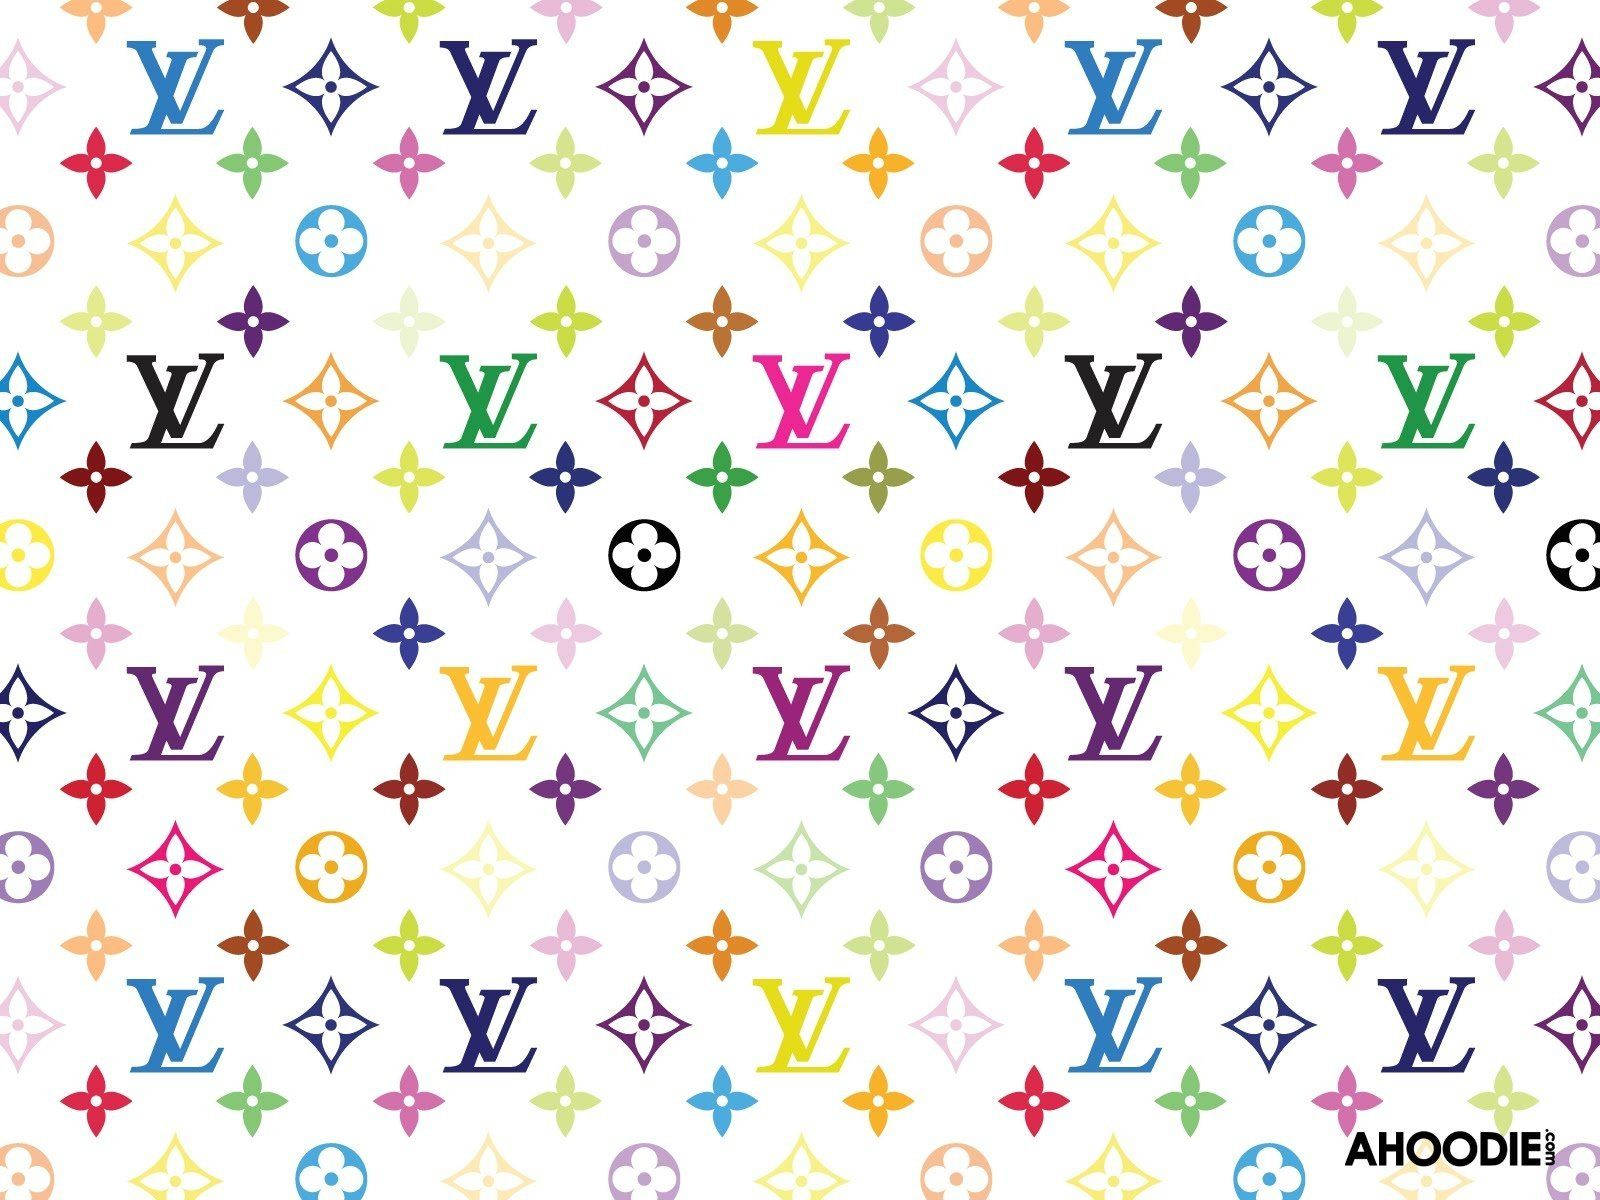 It's time for an arm candy upgrade with Louis Vuitton's timeless design. Wallpaper